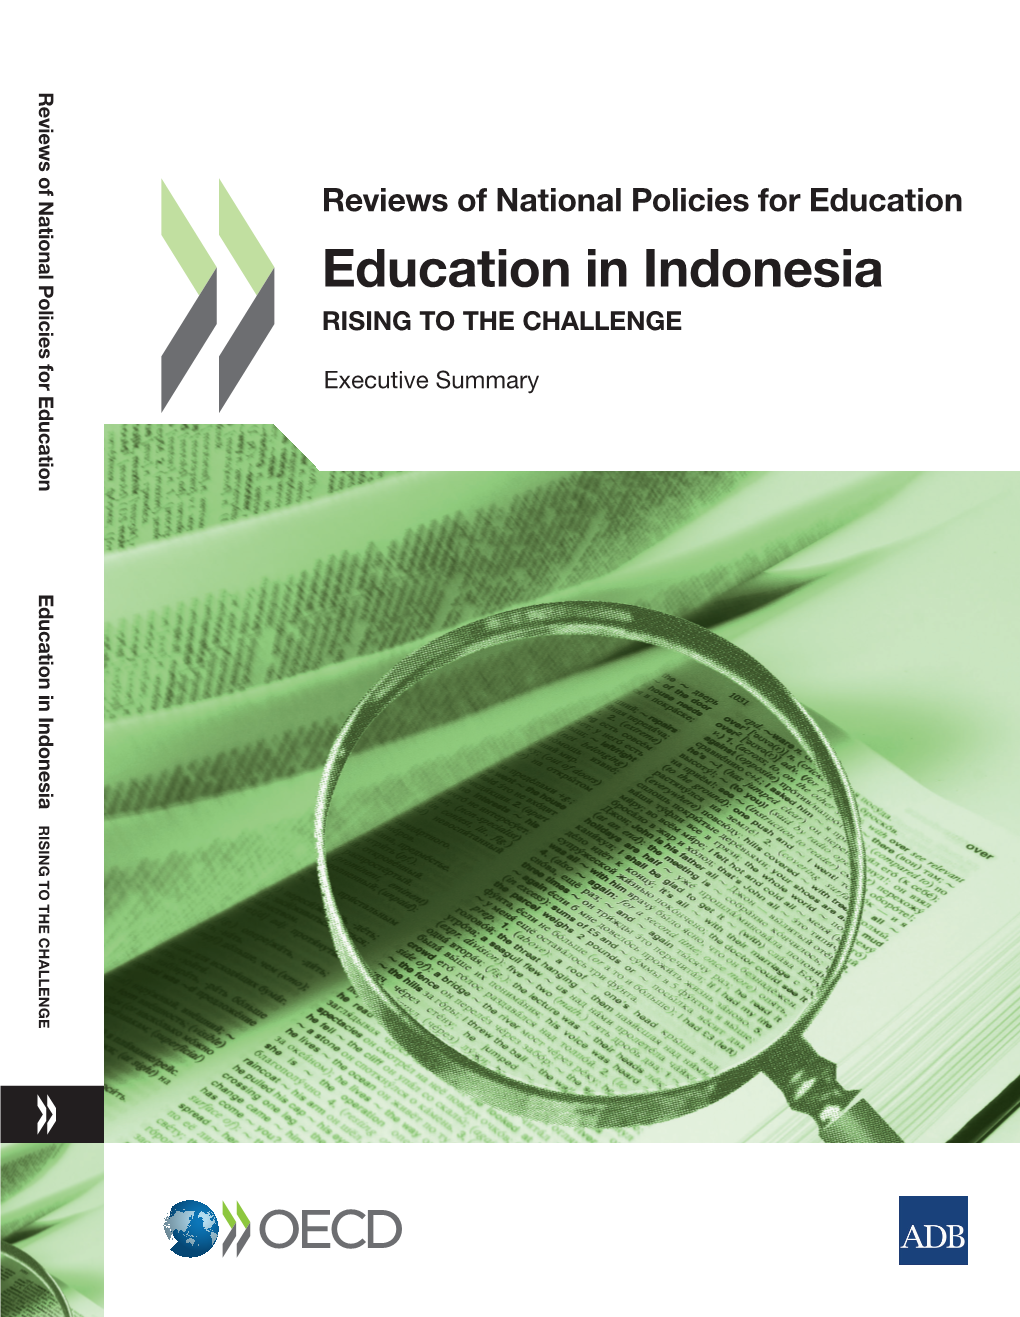 Education in Indonesia Rising to the Challenge